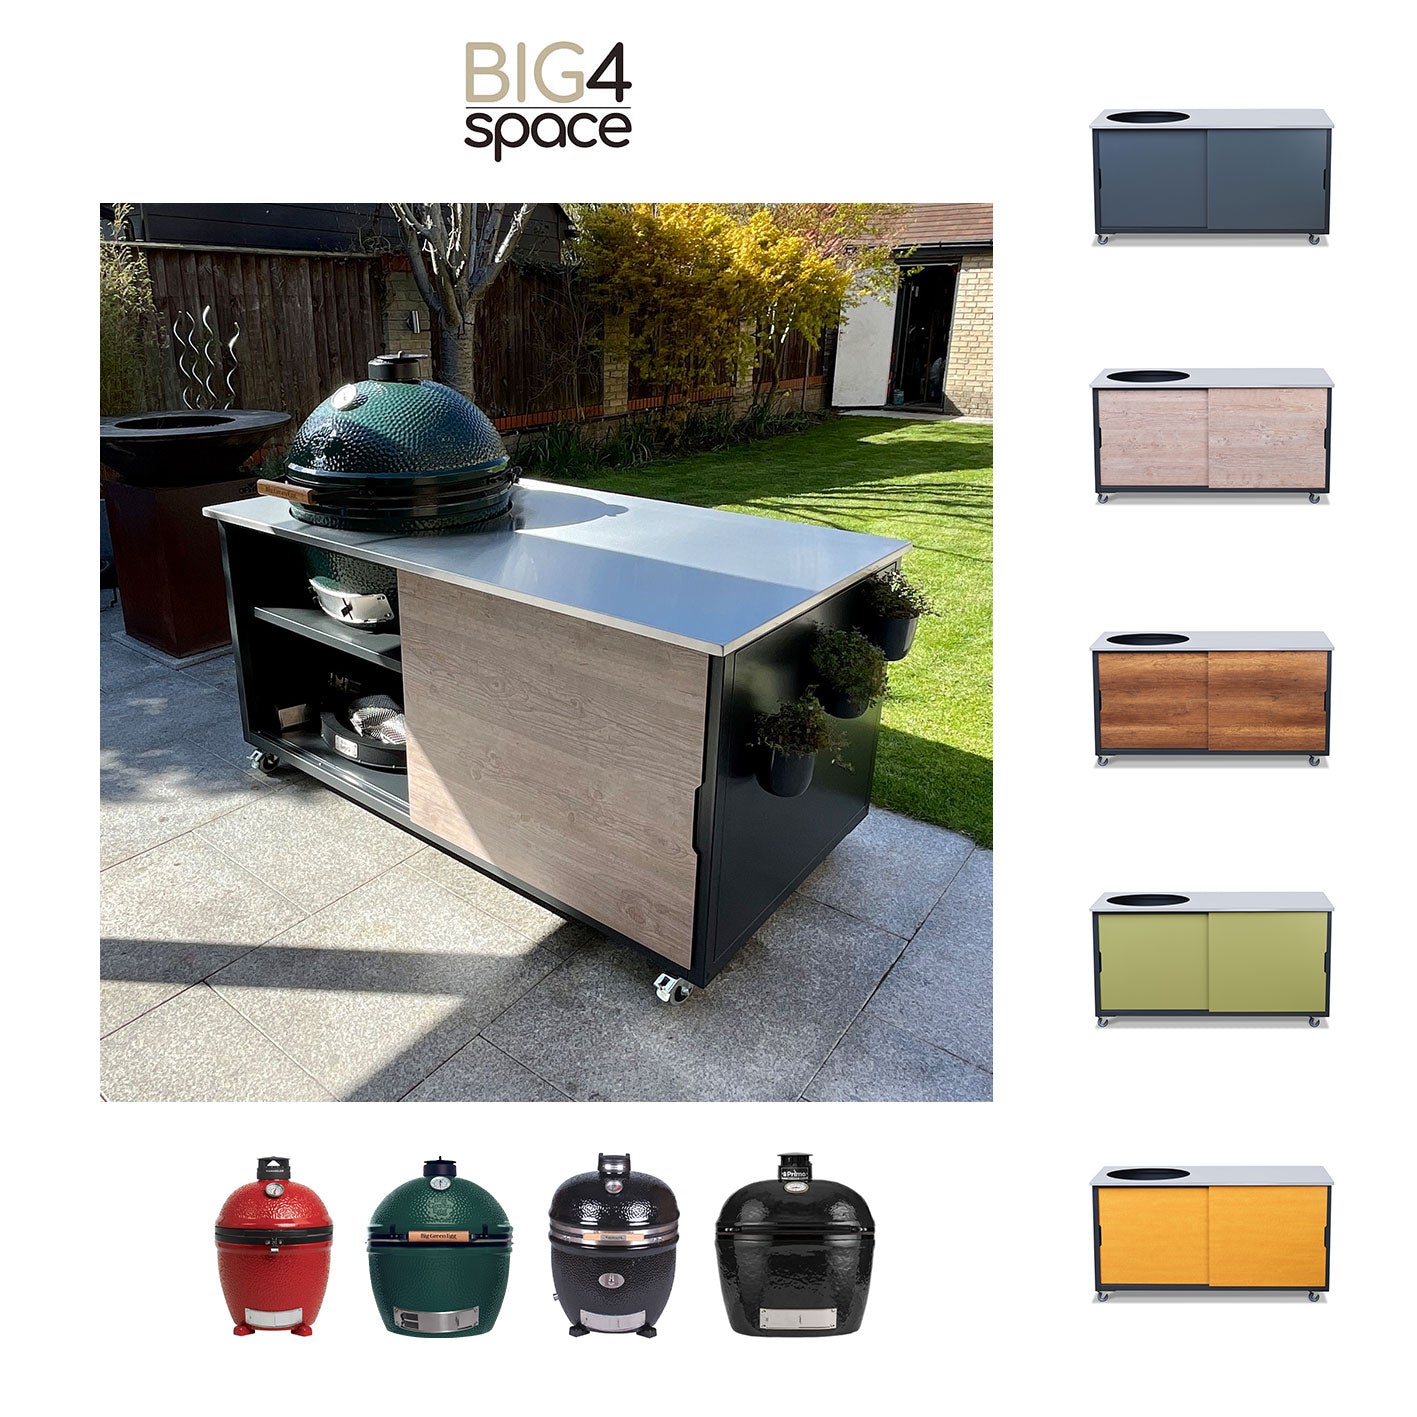 big4space outdoor kitchen - kamado table - bbq kitchen - big4space 180 - premium outdoor kitchen